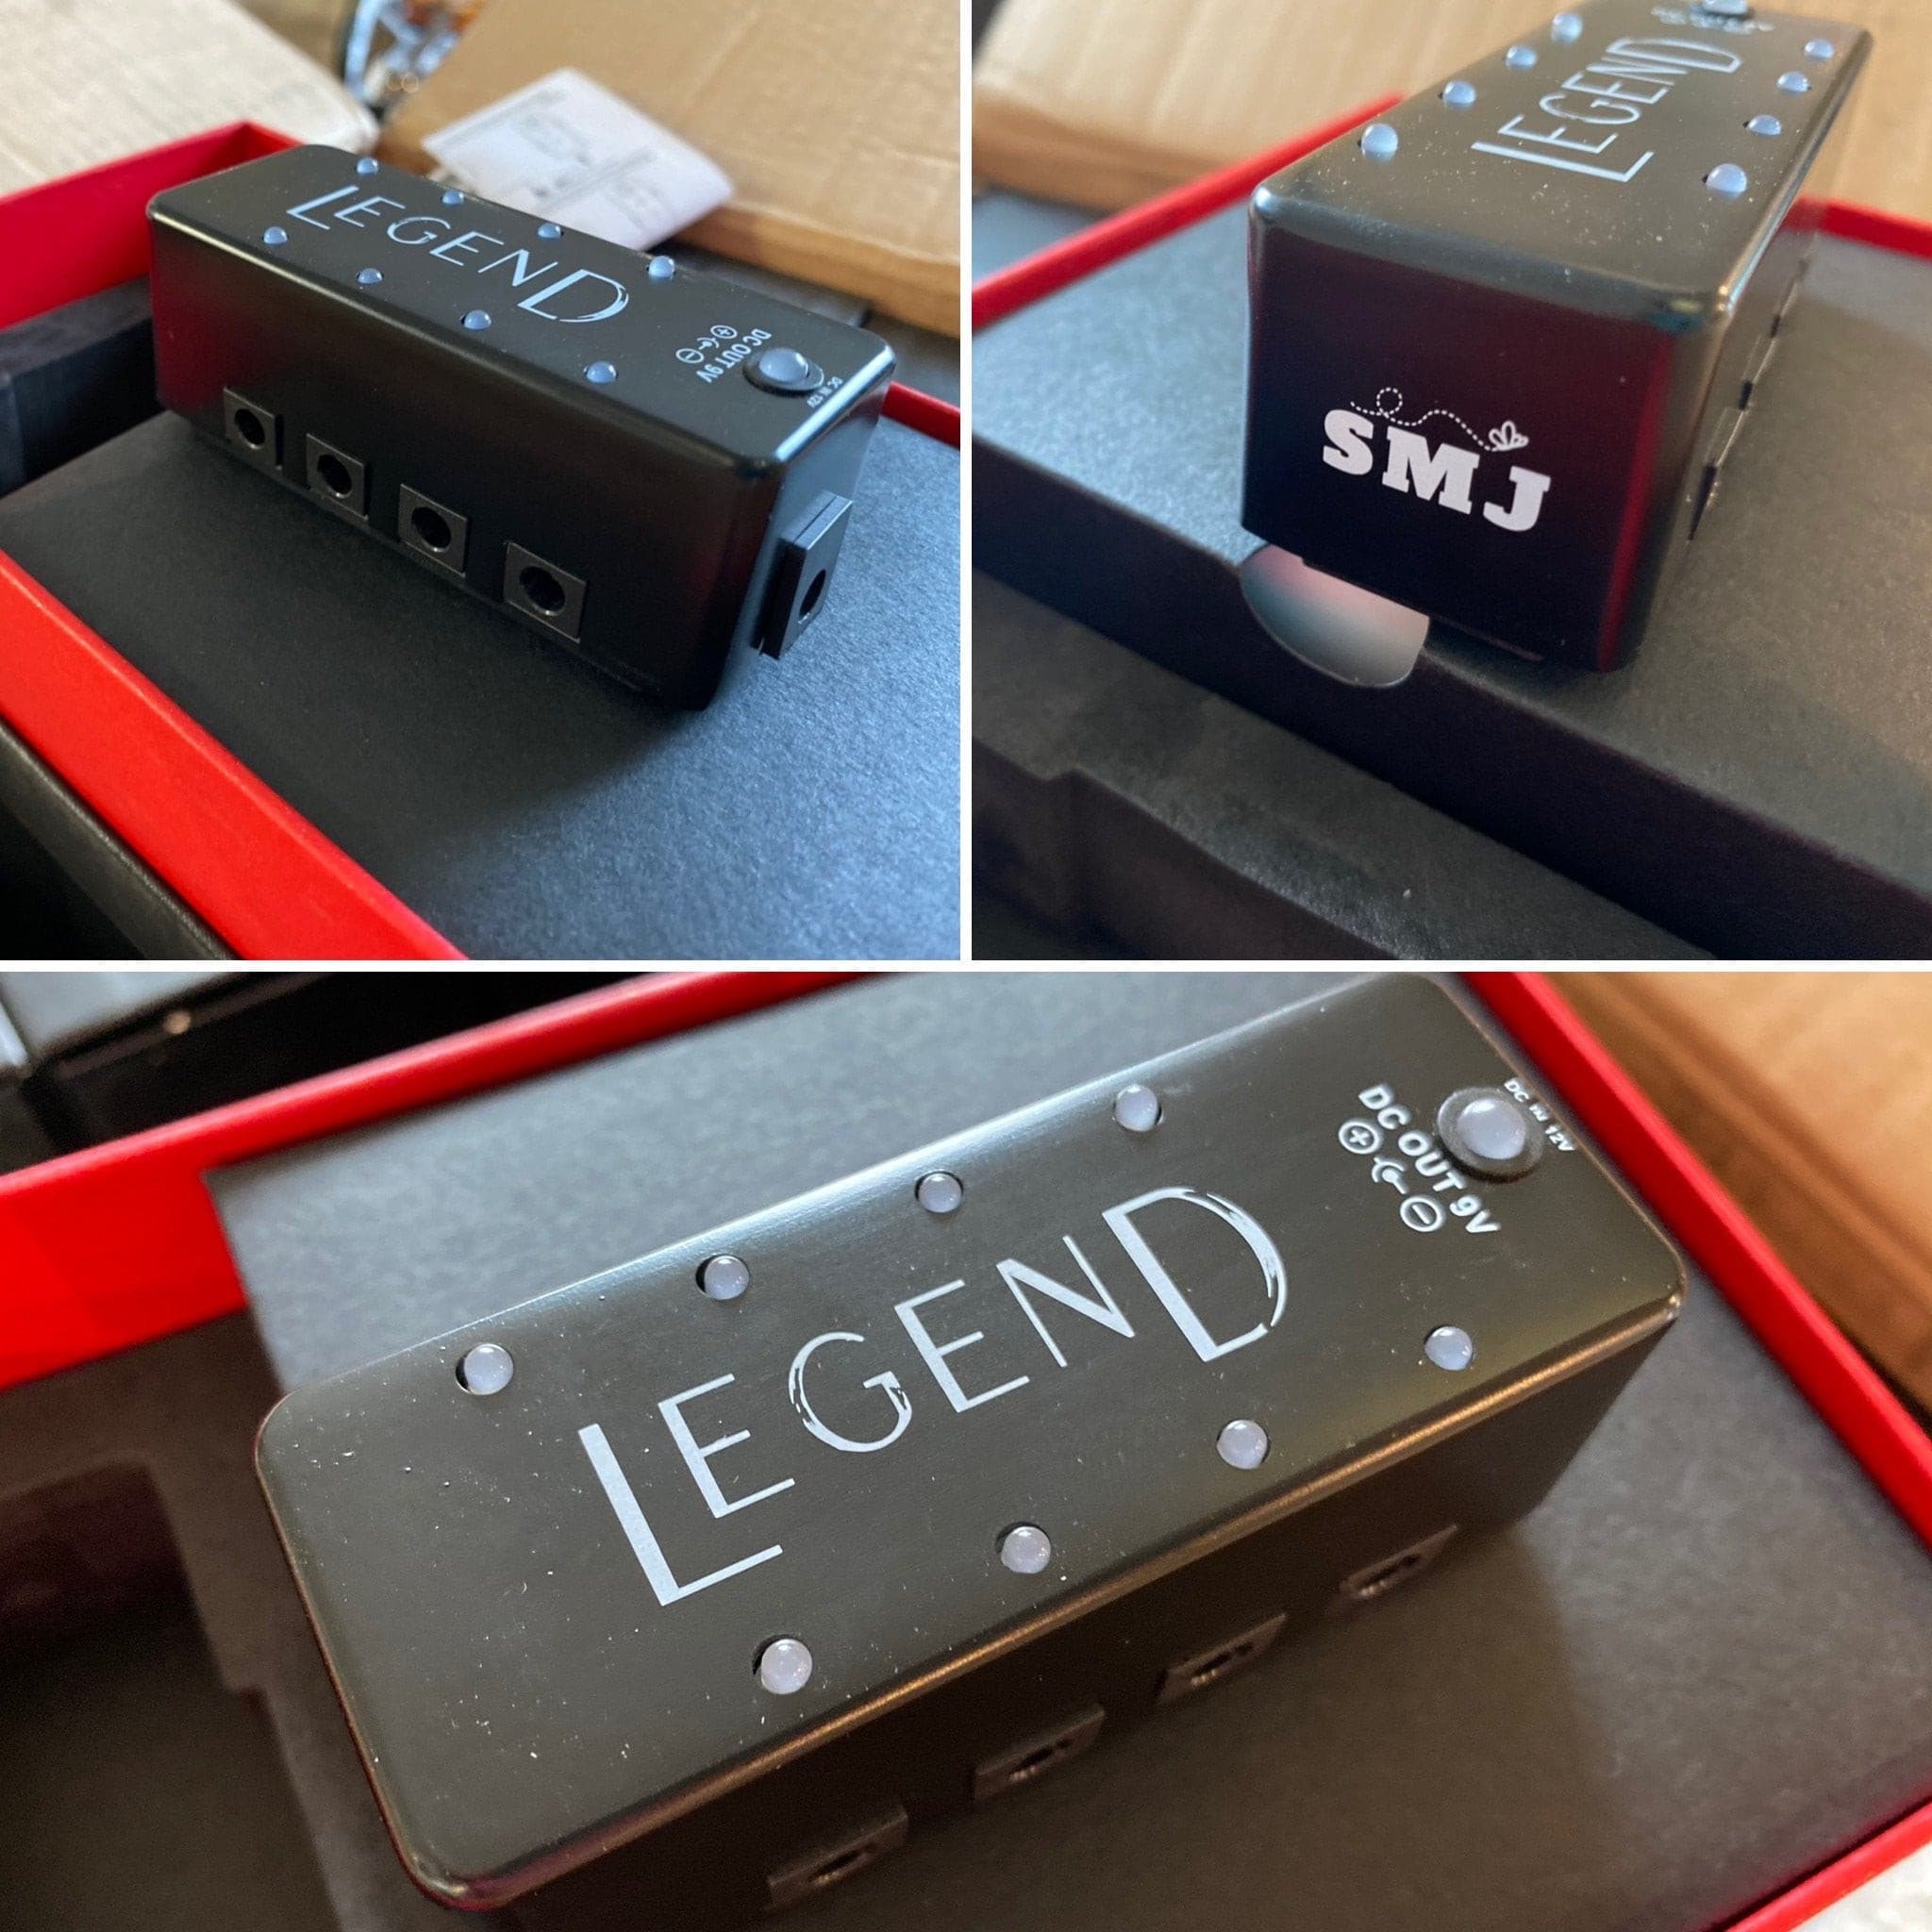 SMJ LEGEND Series Multi Power Supply (8 Inputs), Accessory for sale at Richards Guitars.